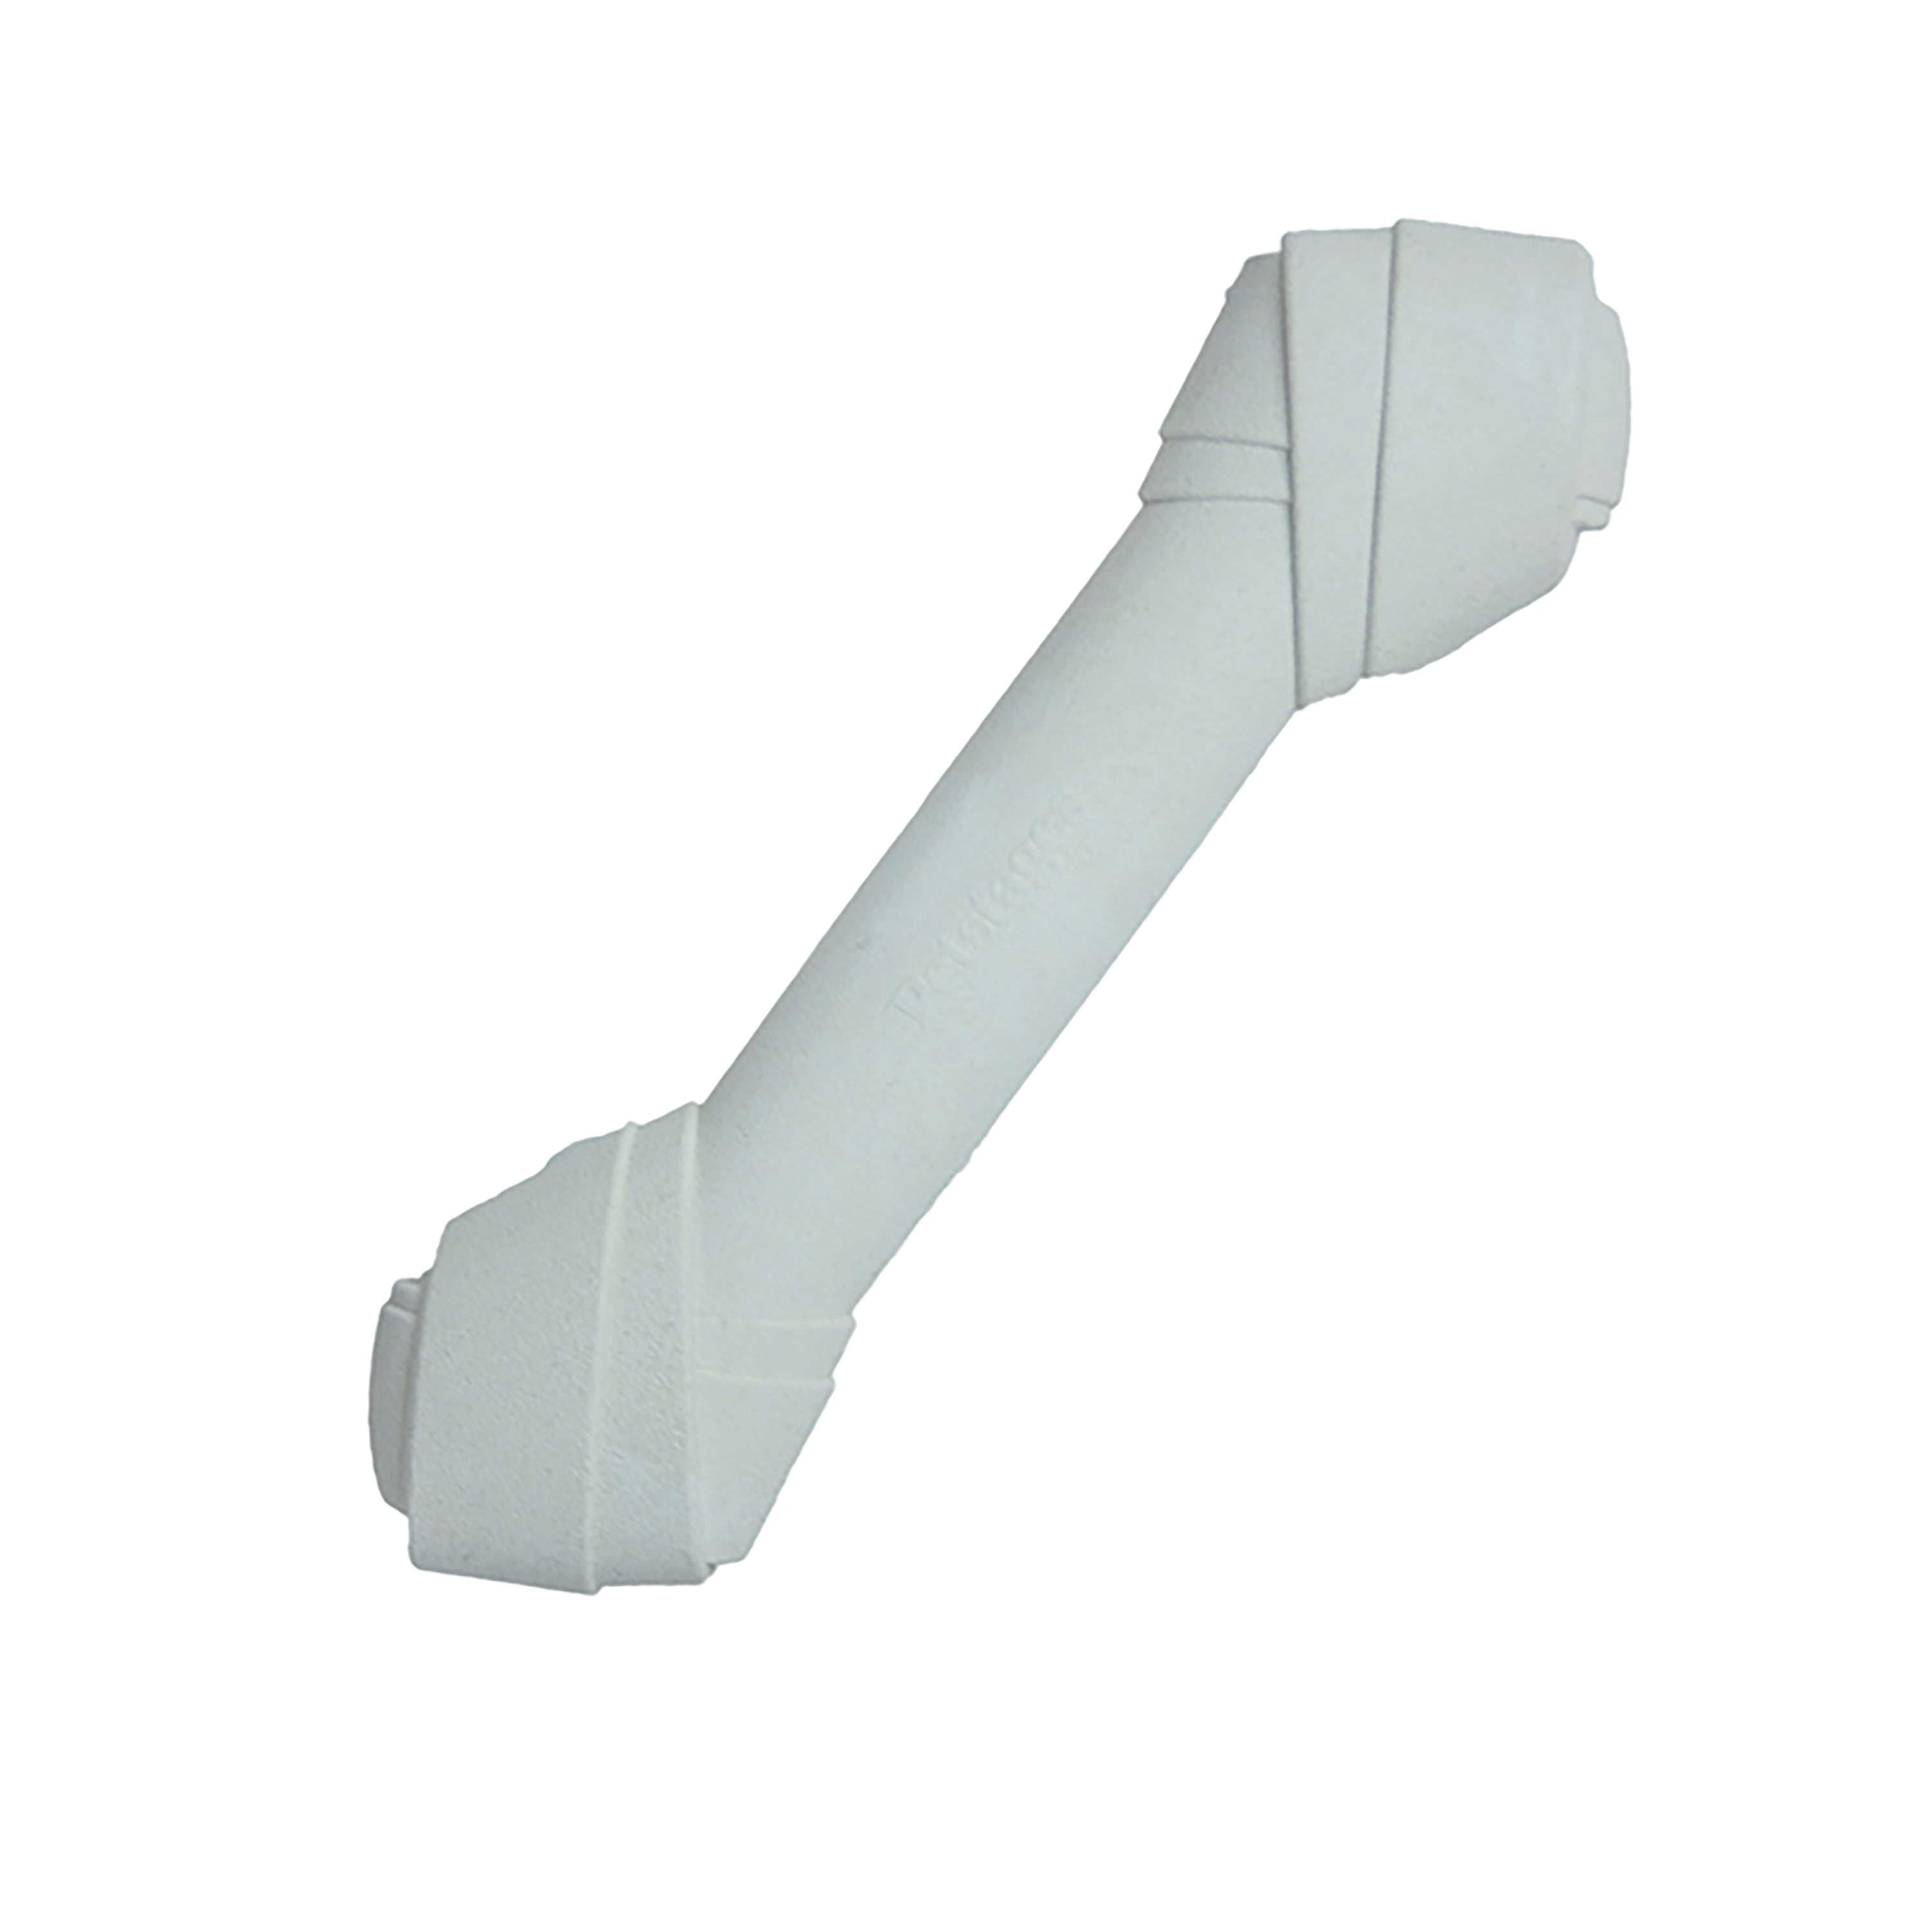 Petstages Newhide Safe Alternative for Rawhide Dog Chew